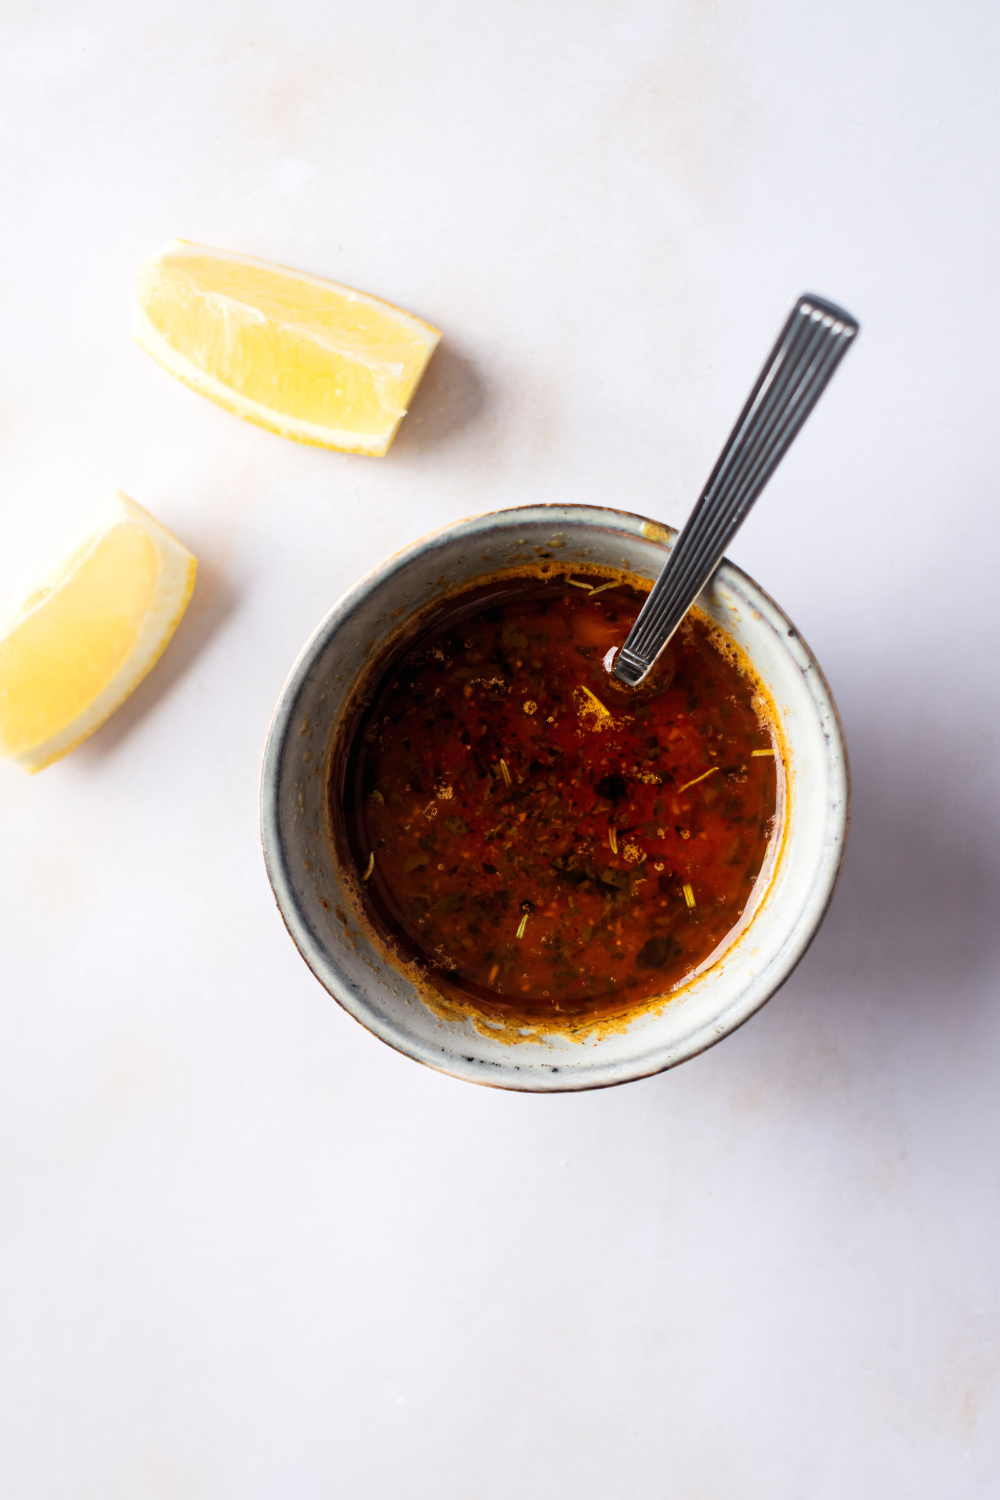 Are utensil in a cup of beloved sauce that is on a gray counter. Behind it or two lemon wedges.